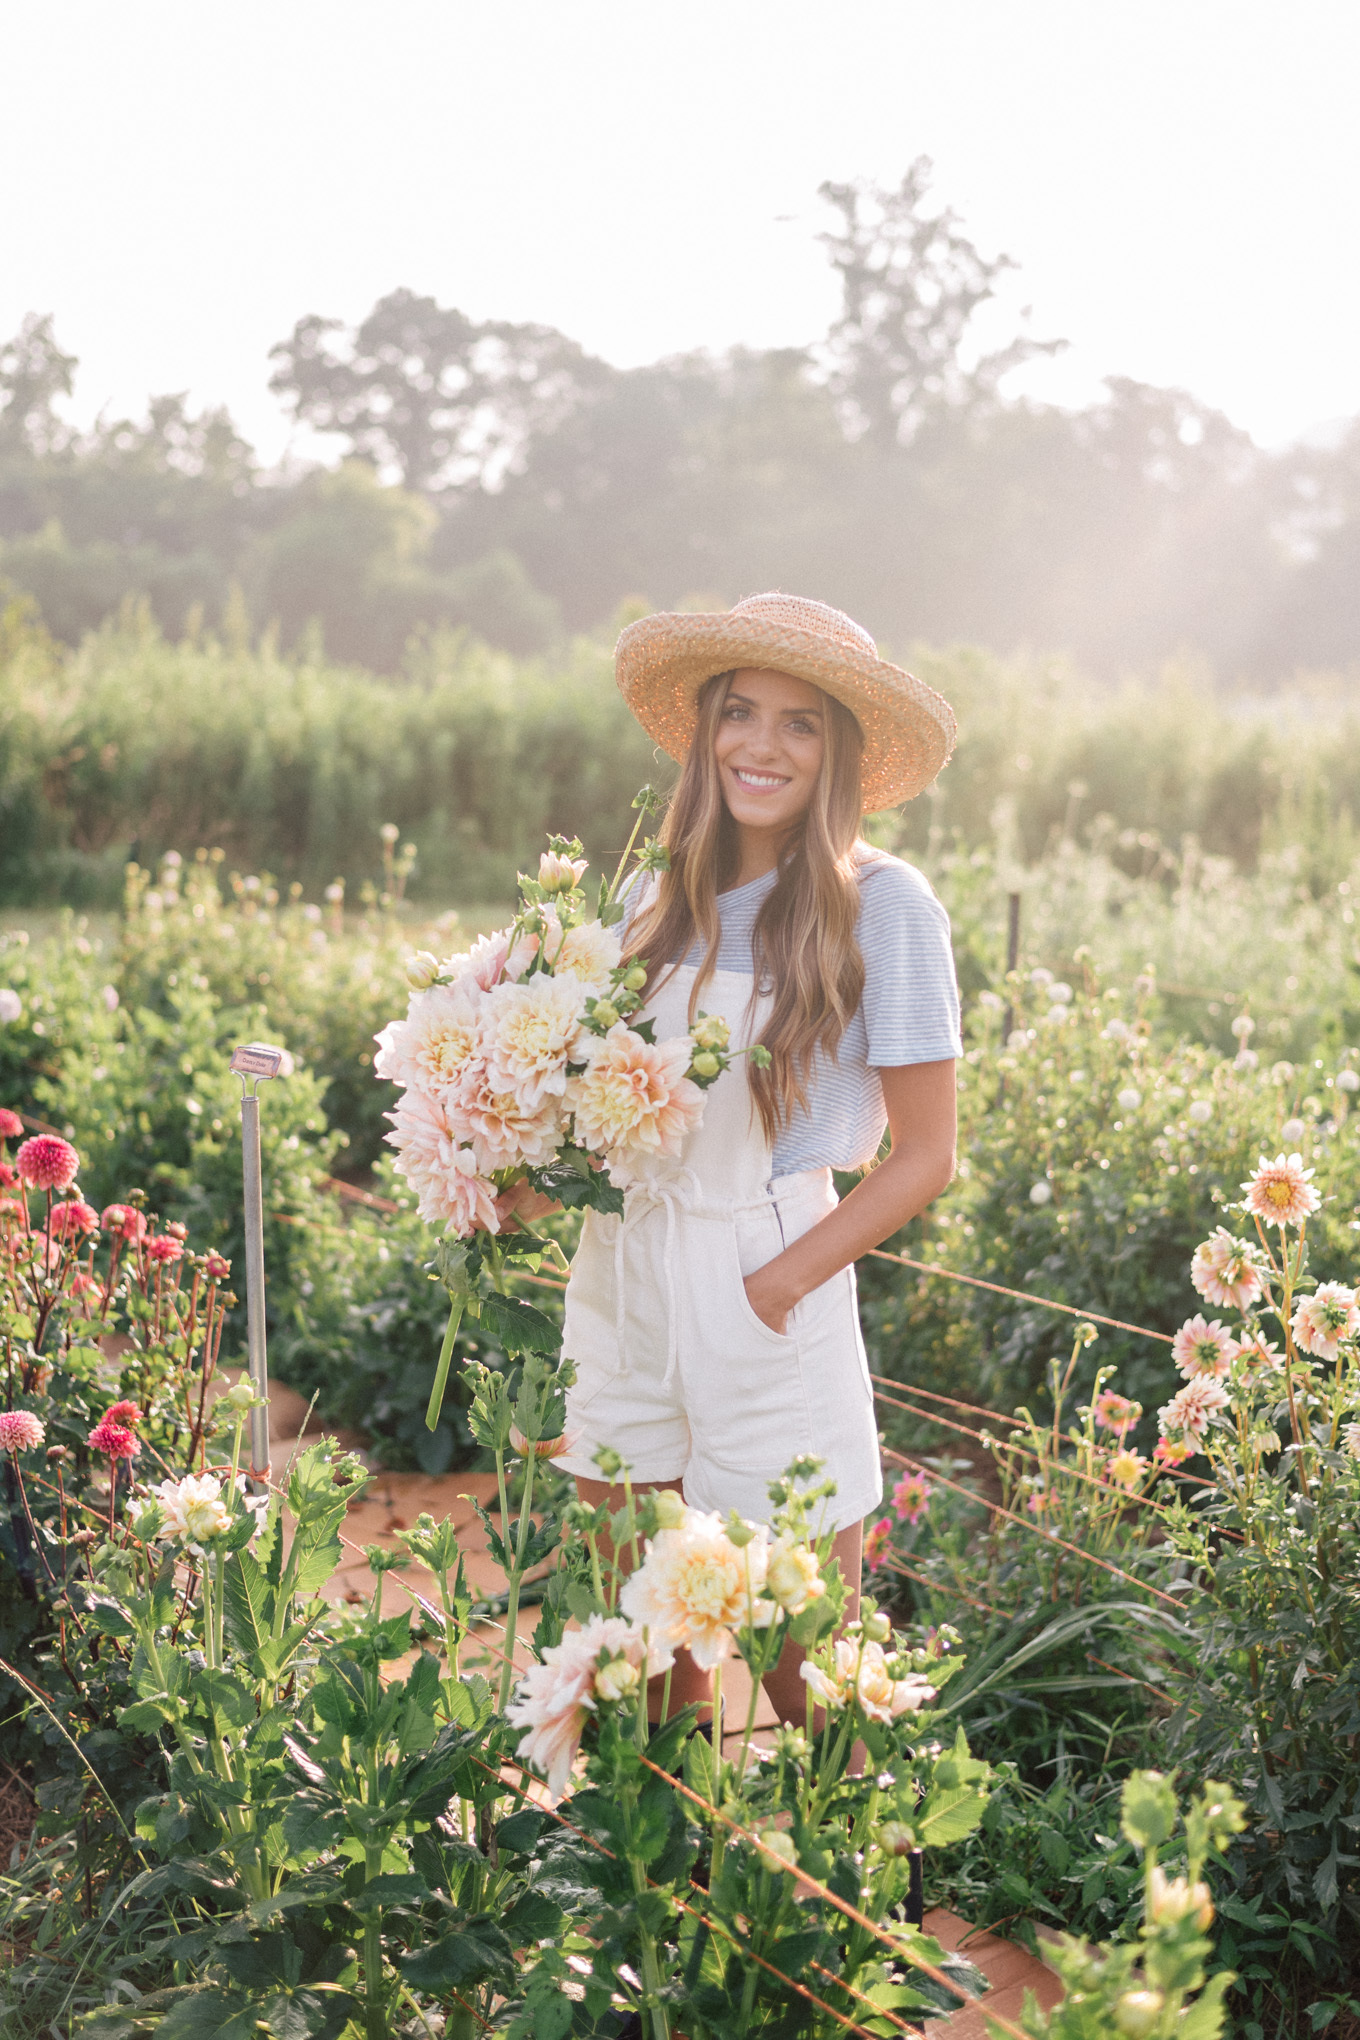 This Flower Farm Will Make You Want To Become A Flower Farmer - Gal ...